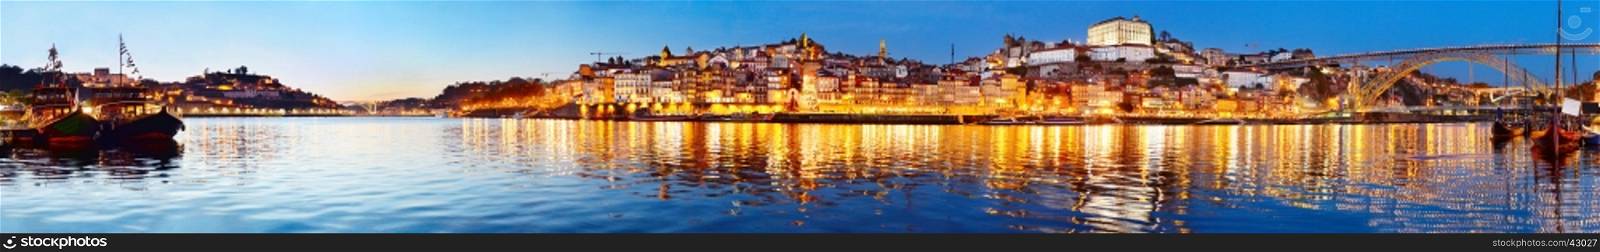 Panoramic view of Porto at twilight with reflection in Douro river. Portugal